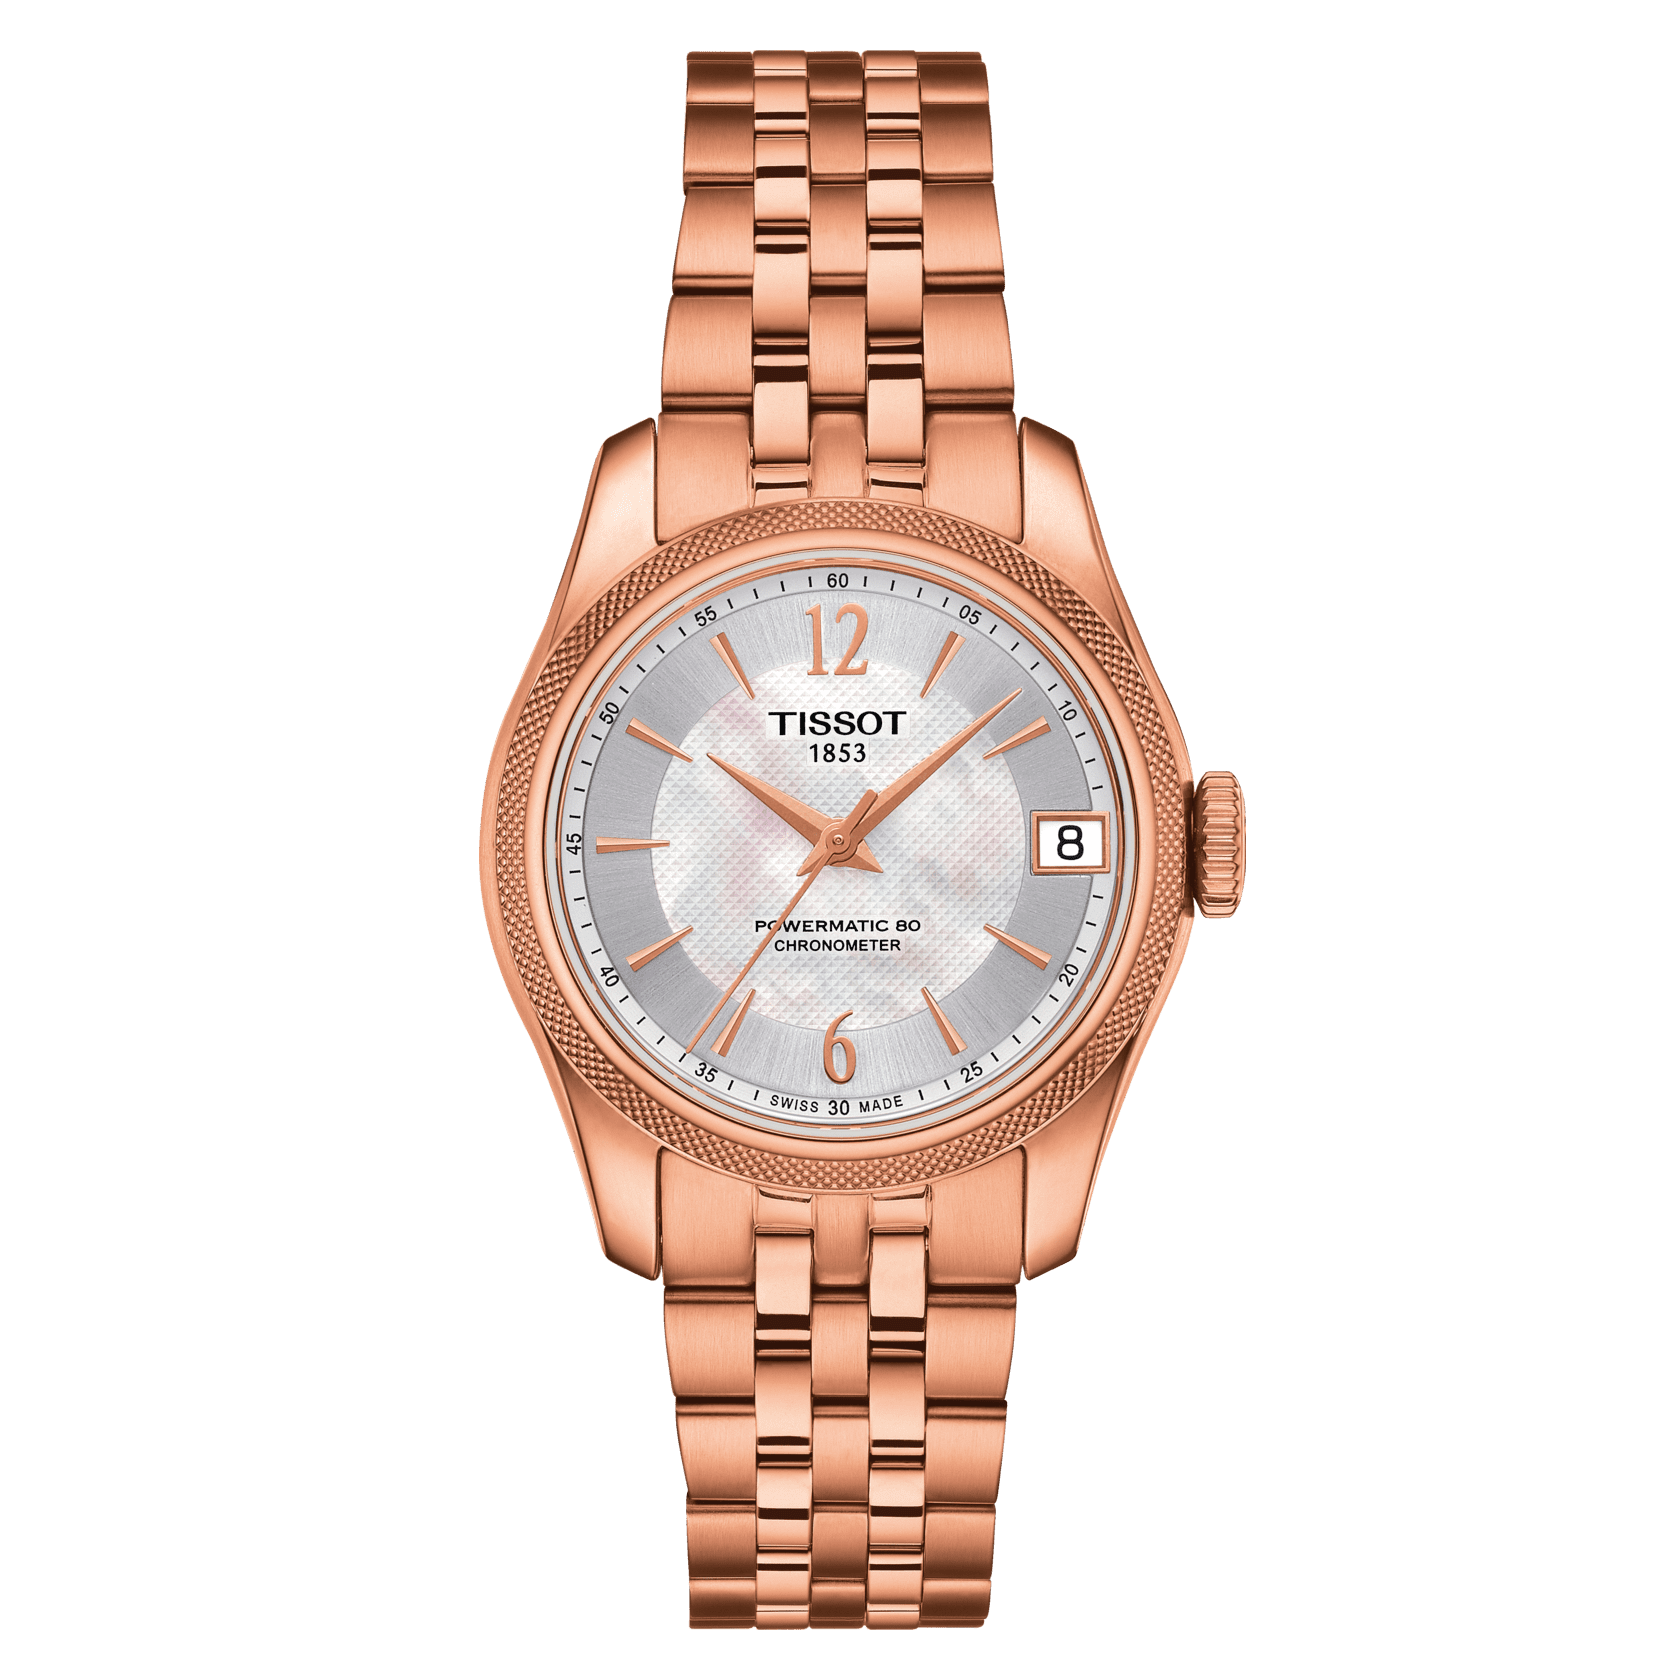 Buy Cheap Replica Watches Online India